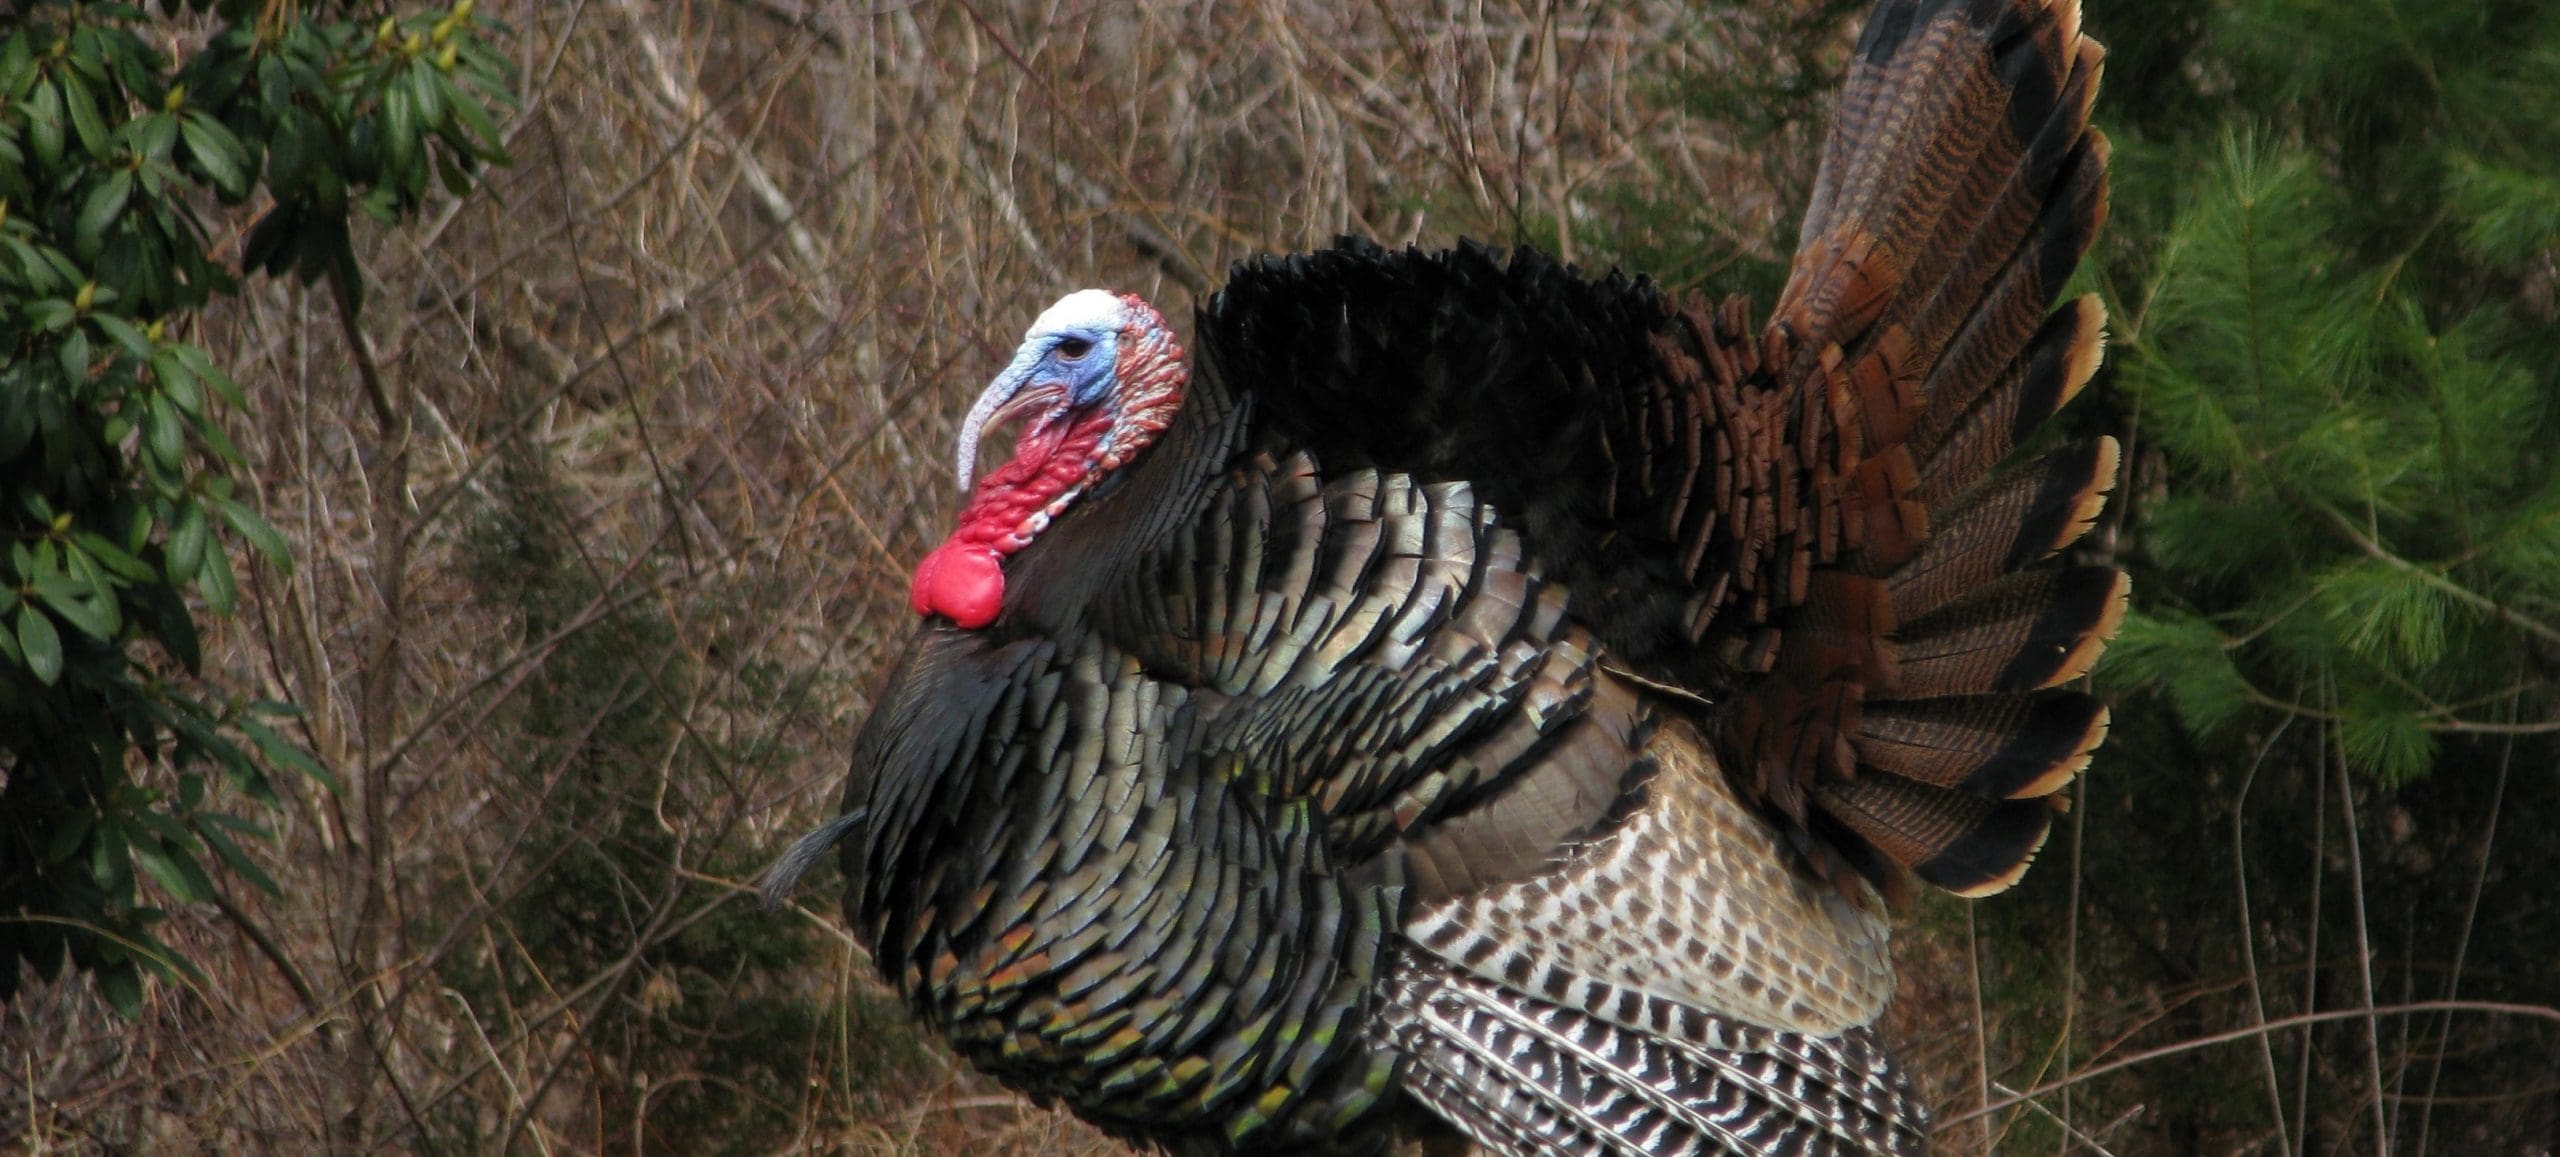 10 Fascinating Facts About Turkeys